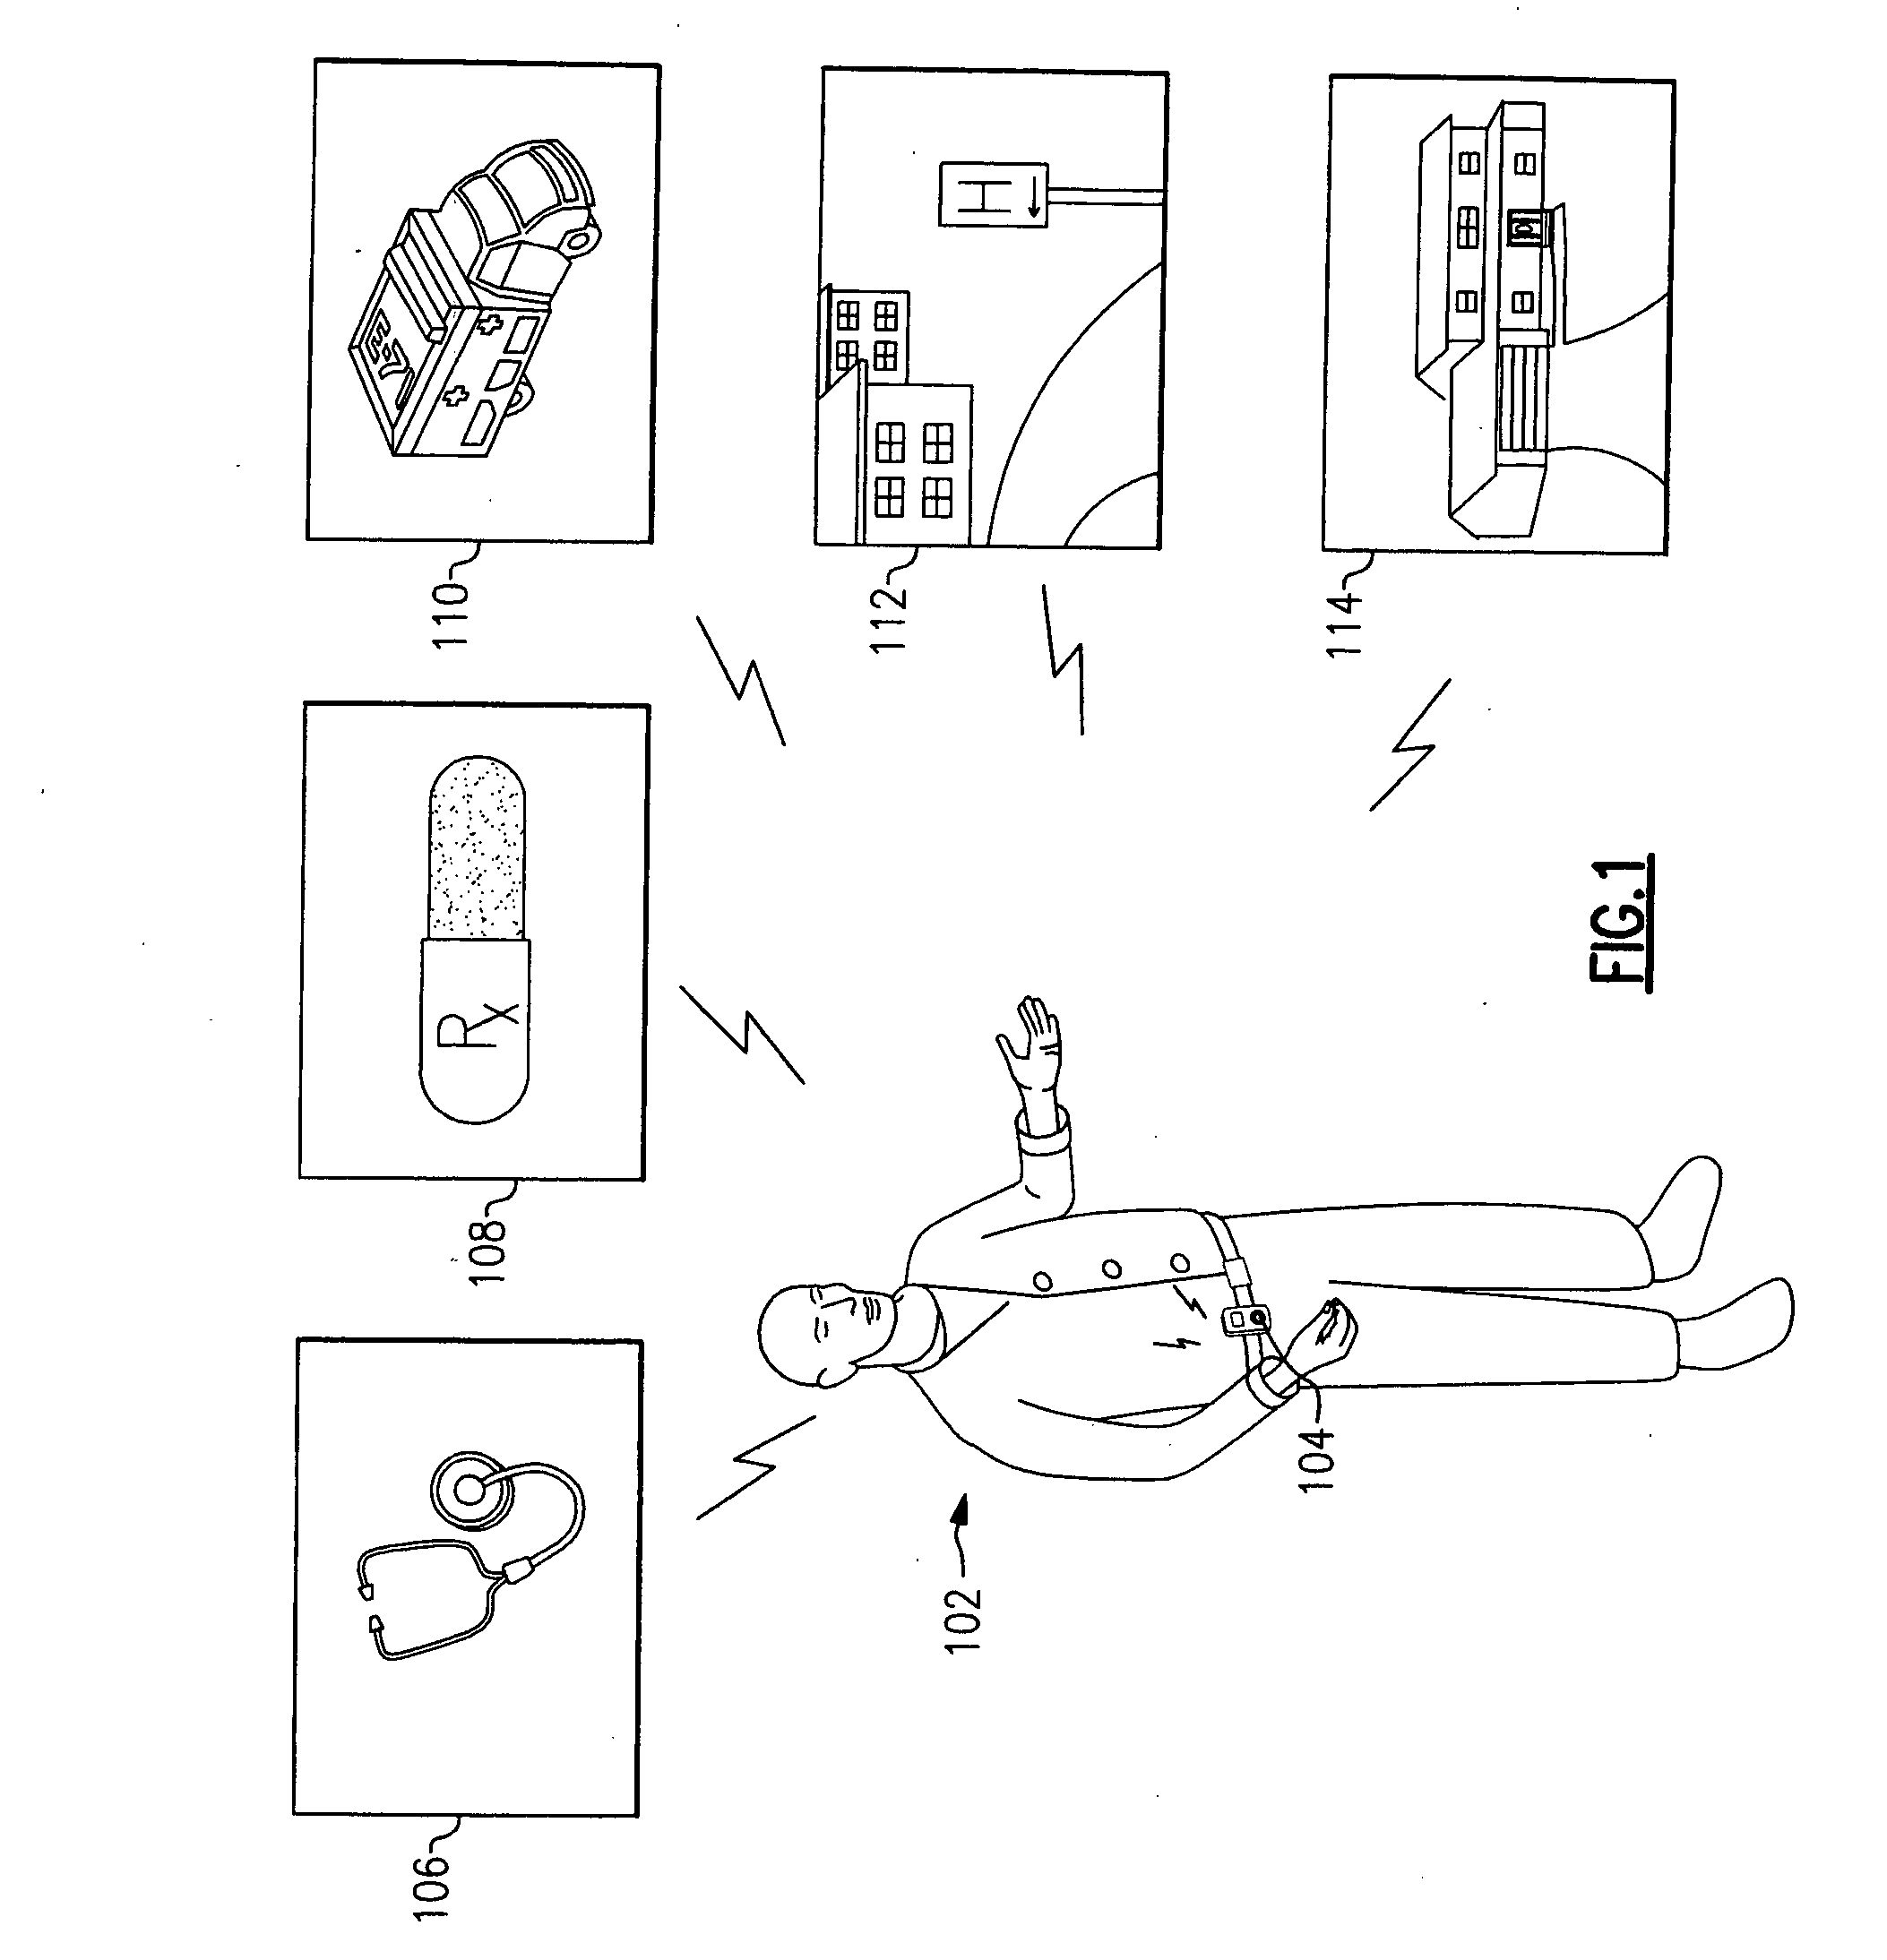 Portable patient devices, systems, and methods for providing patient aid and preventing medical errors, for monitoring patient use of ingestible medications, and for preventing distribution of counterfeit drugs